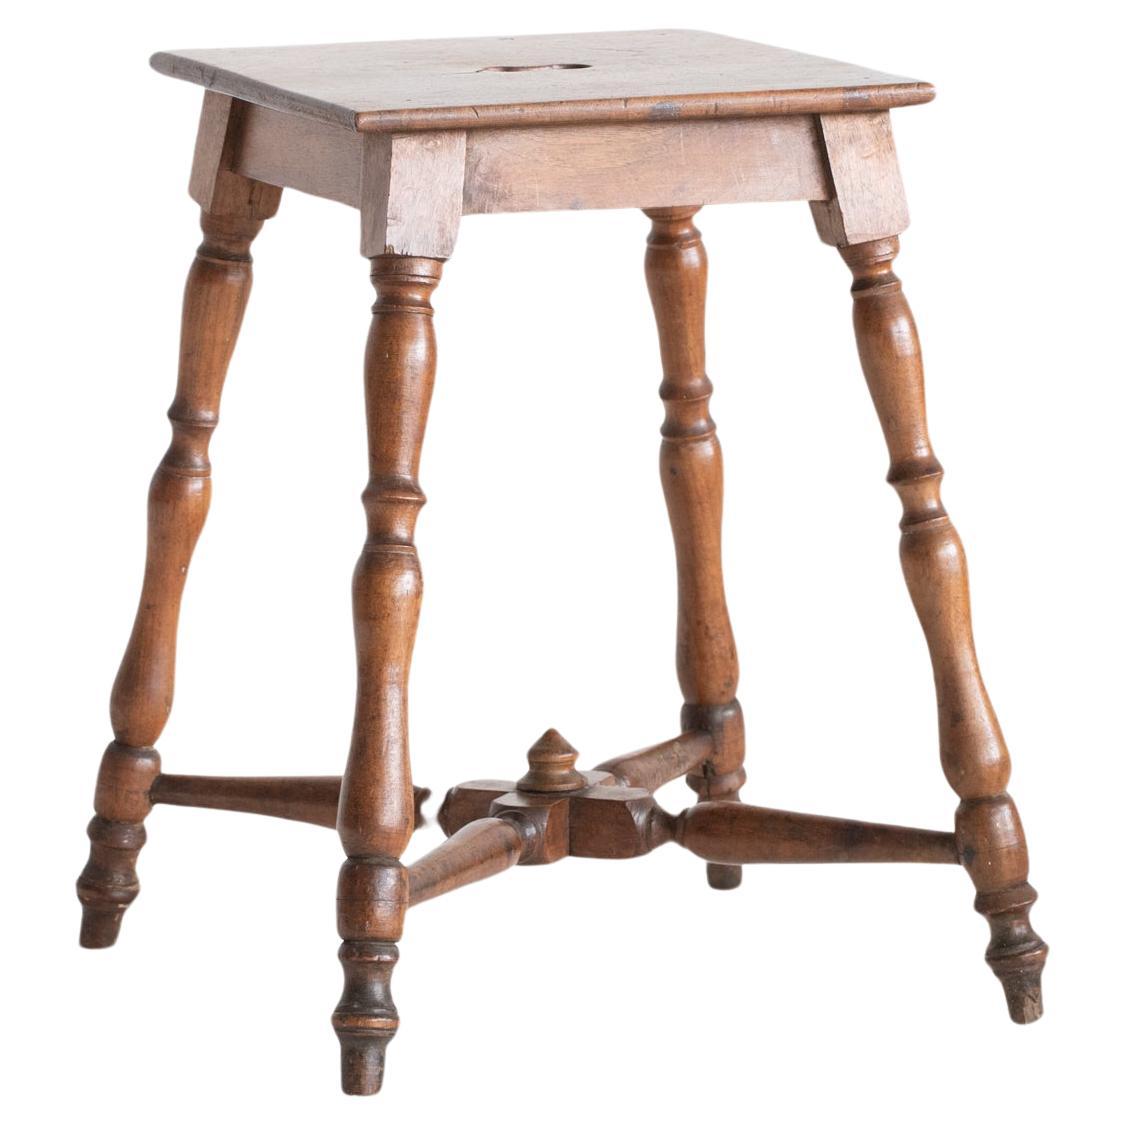 Early 20th Century Vernacular French Walnut Stool For Sale